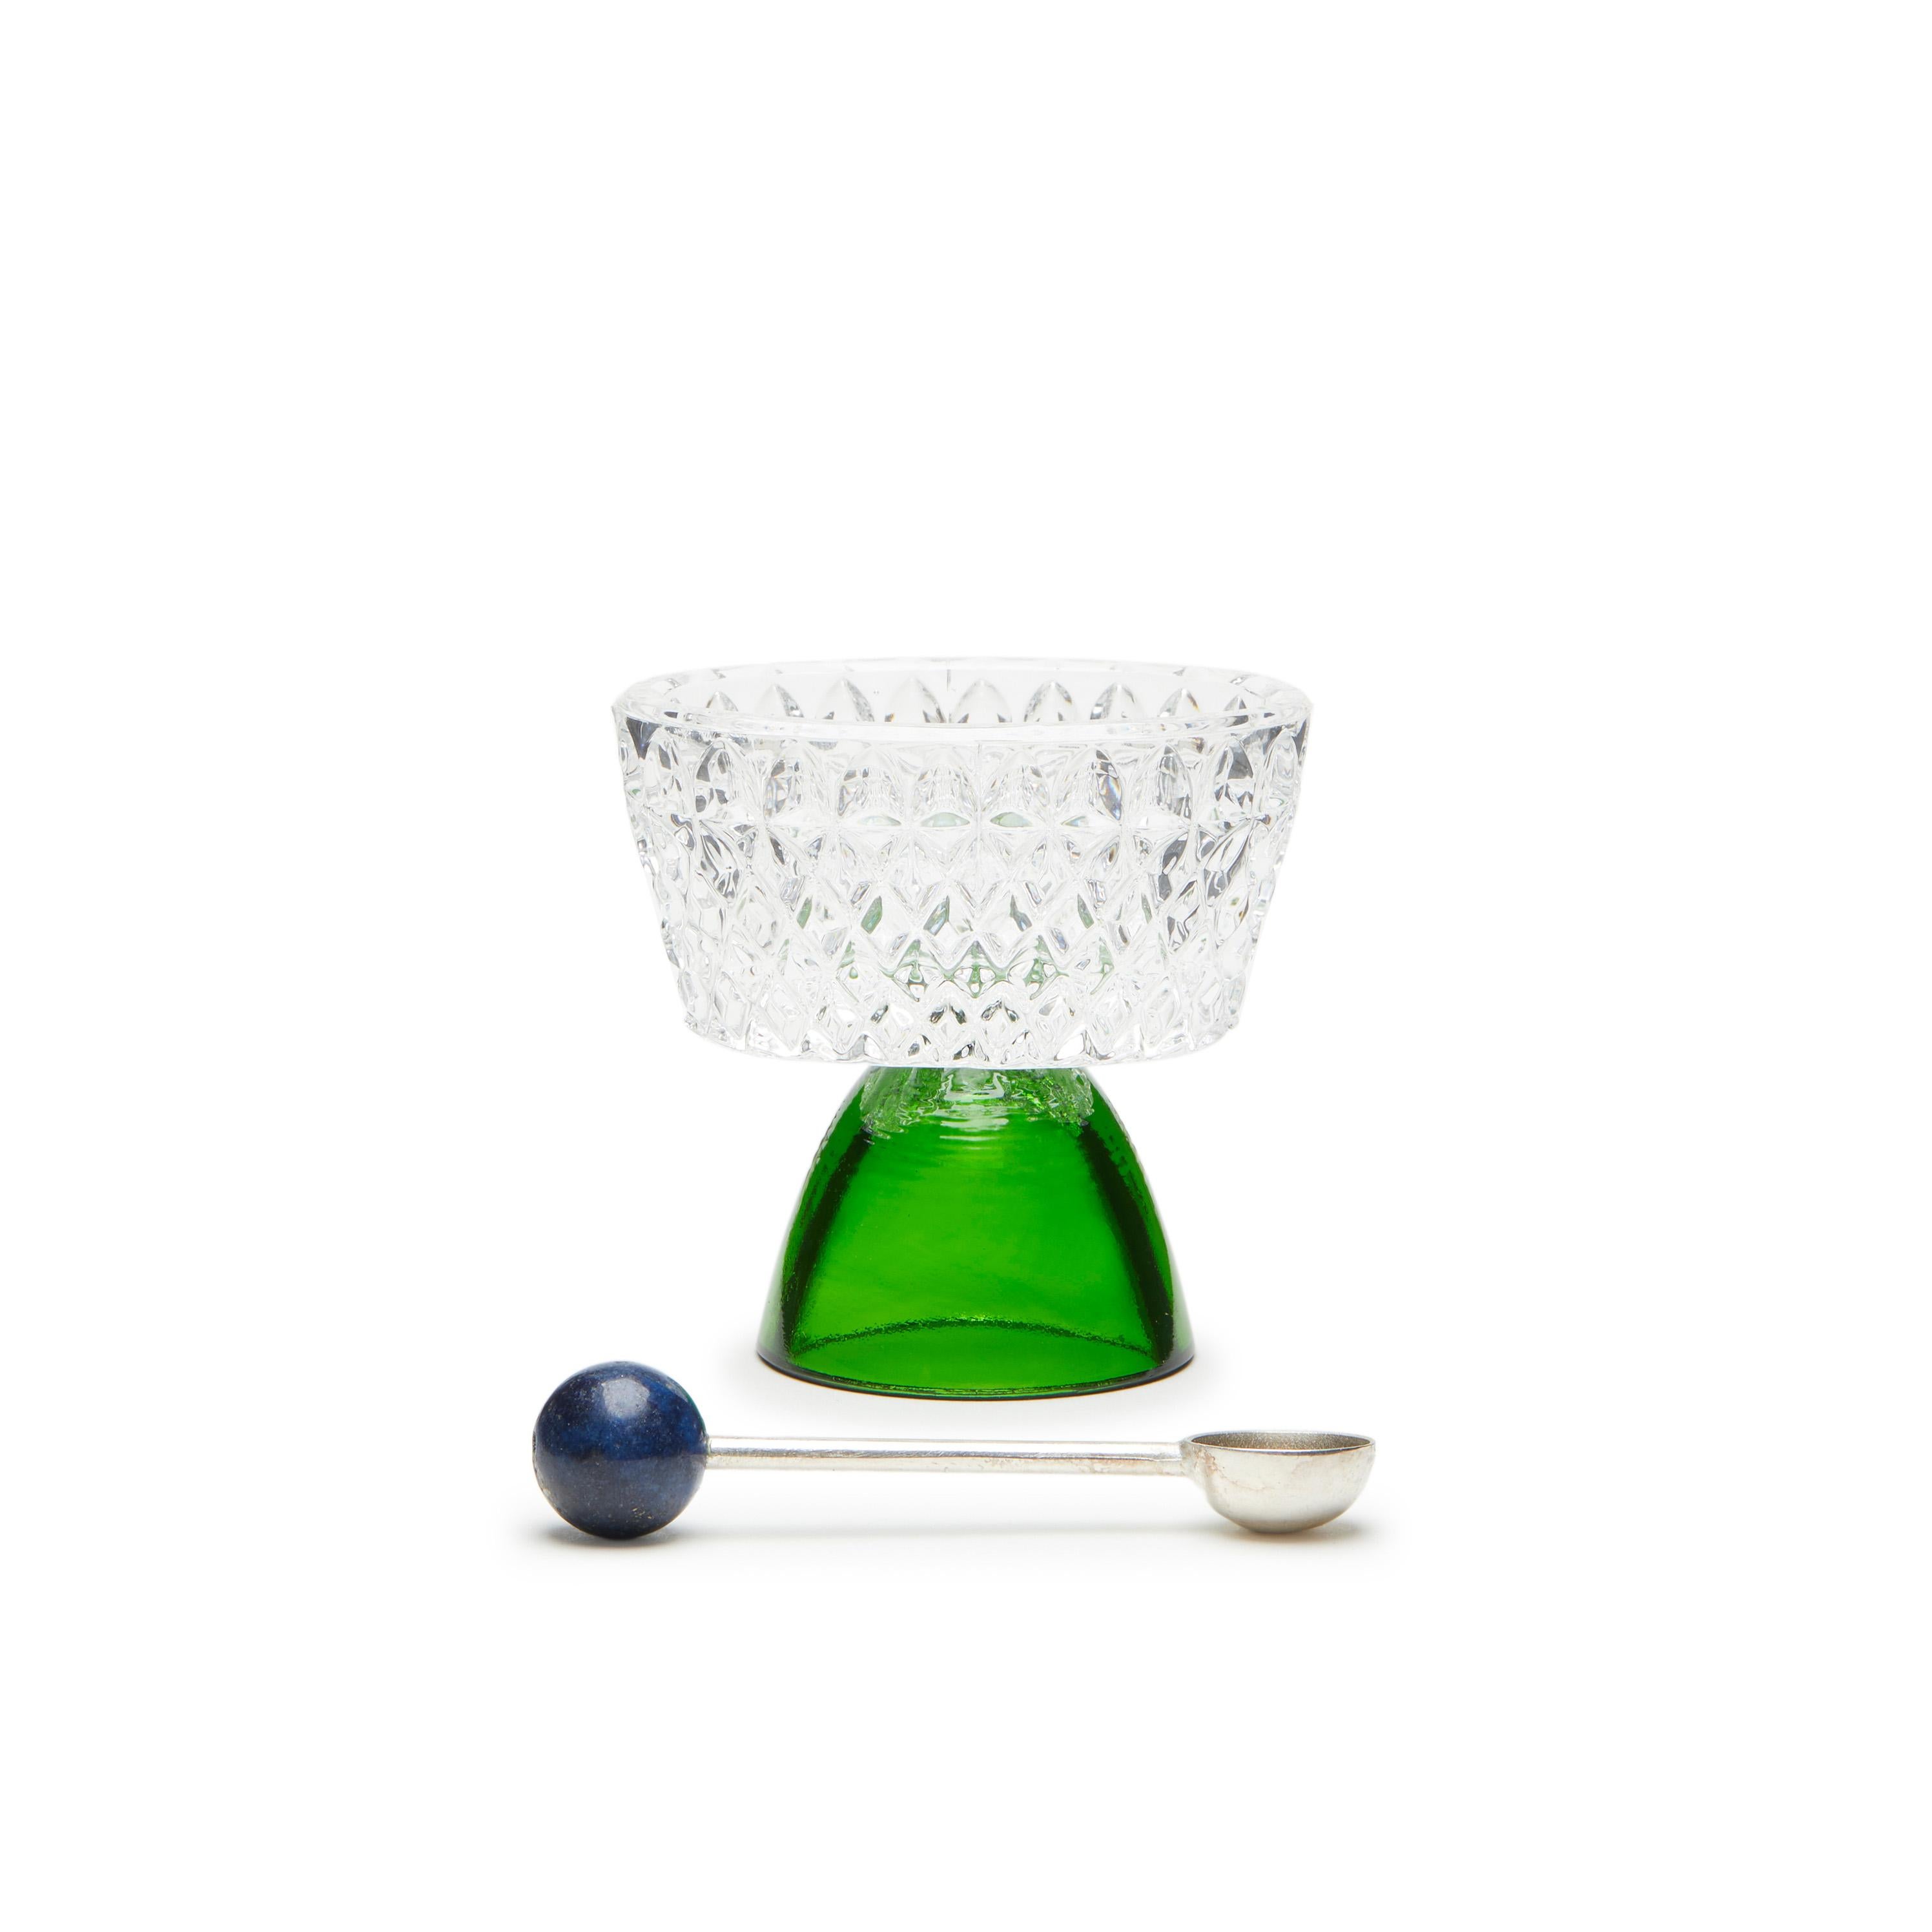 Add sophistication to your table with the diamantino salt cellar from natalia criado.  Each vessel is crafted from repurposed crystal, sourced from glassmakers in Tuscany.  The practice of recontextualizing these materials breathes new life into